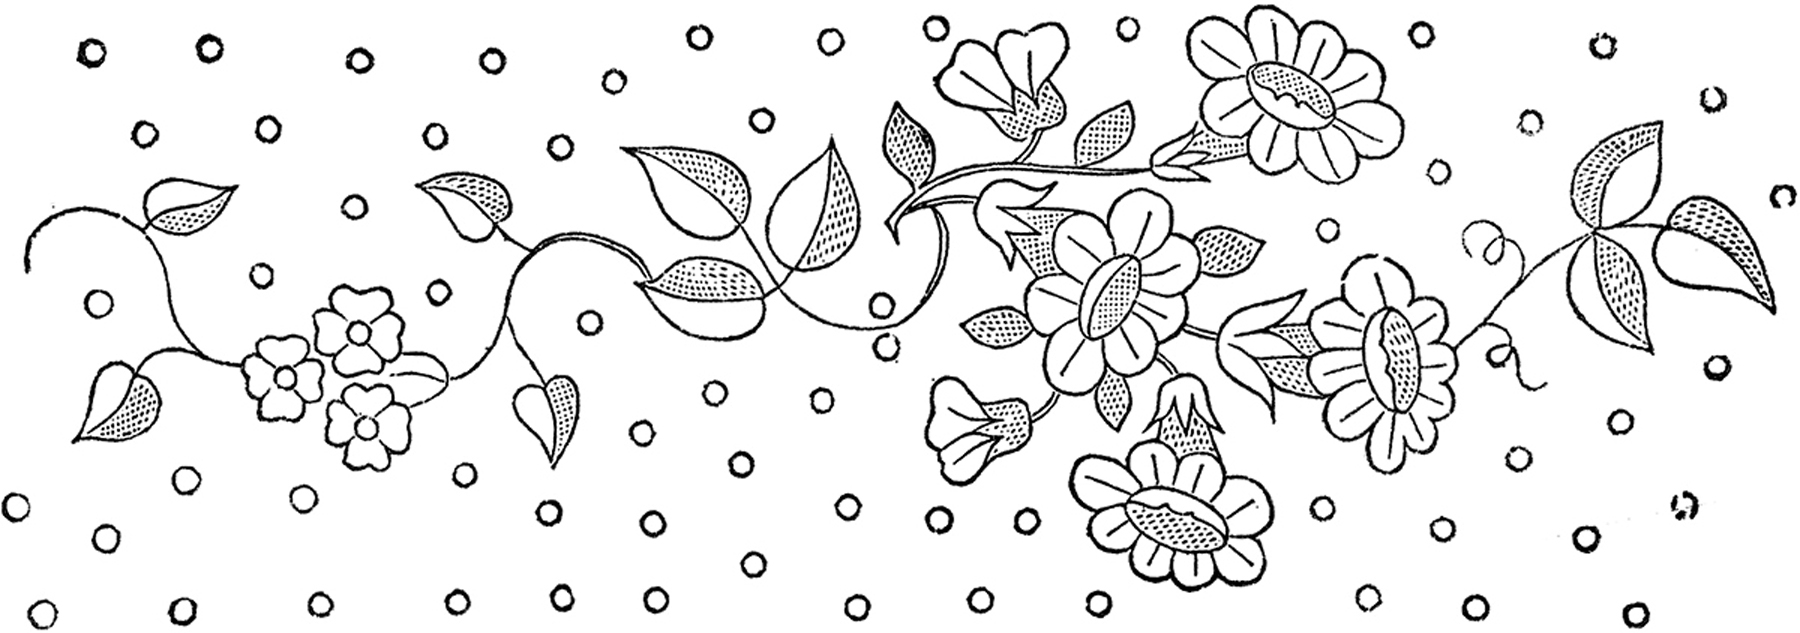 Free Hand Embroidery Patterns To Print Floral Embroidery Patterns Pretty The Graphics Fairy